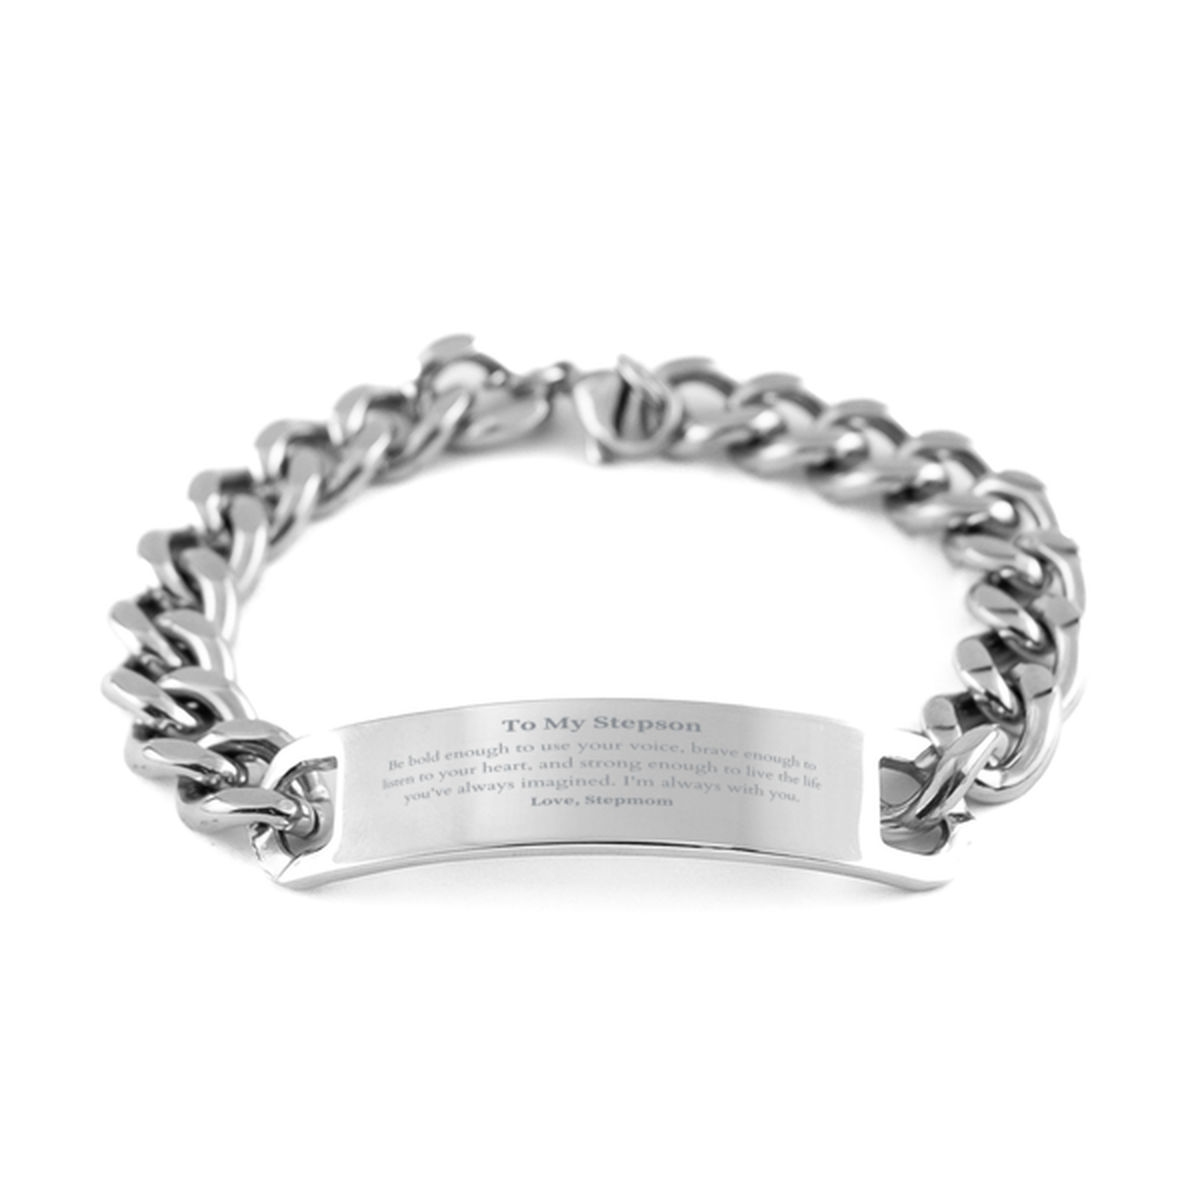 Keepsake Stepson Cuban Chain Stainless Steel Bracelet Gift Idea Graduation Christmas Birthday Stepson from Stepmom, Stepson Be bold enough to use your voice, brave enough to listen to your heart. Love, Stepmom